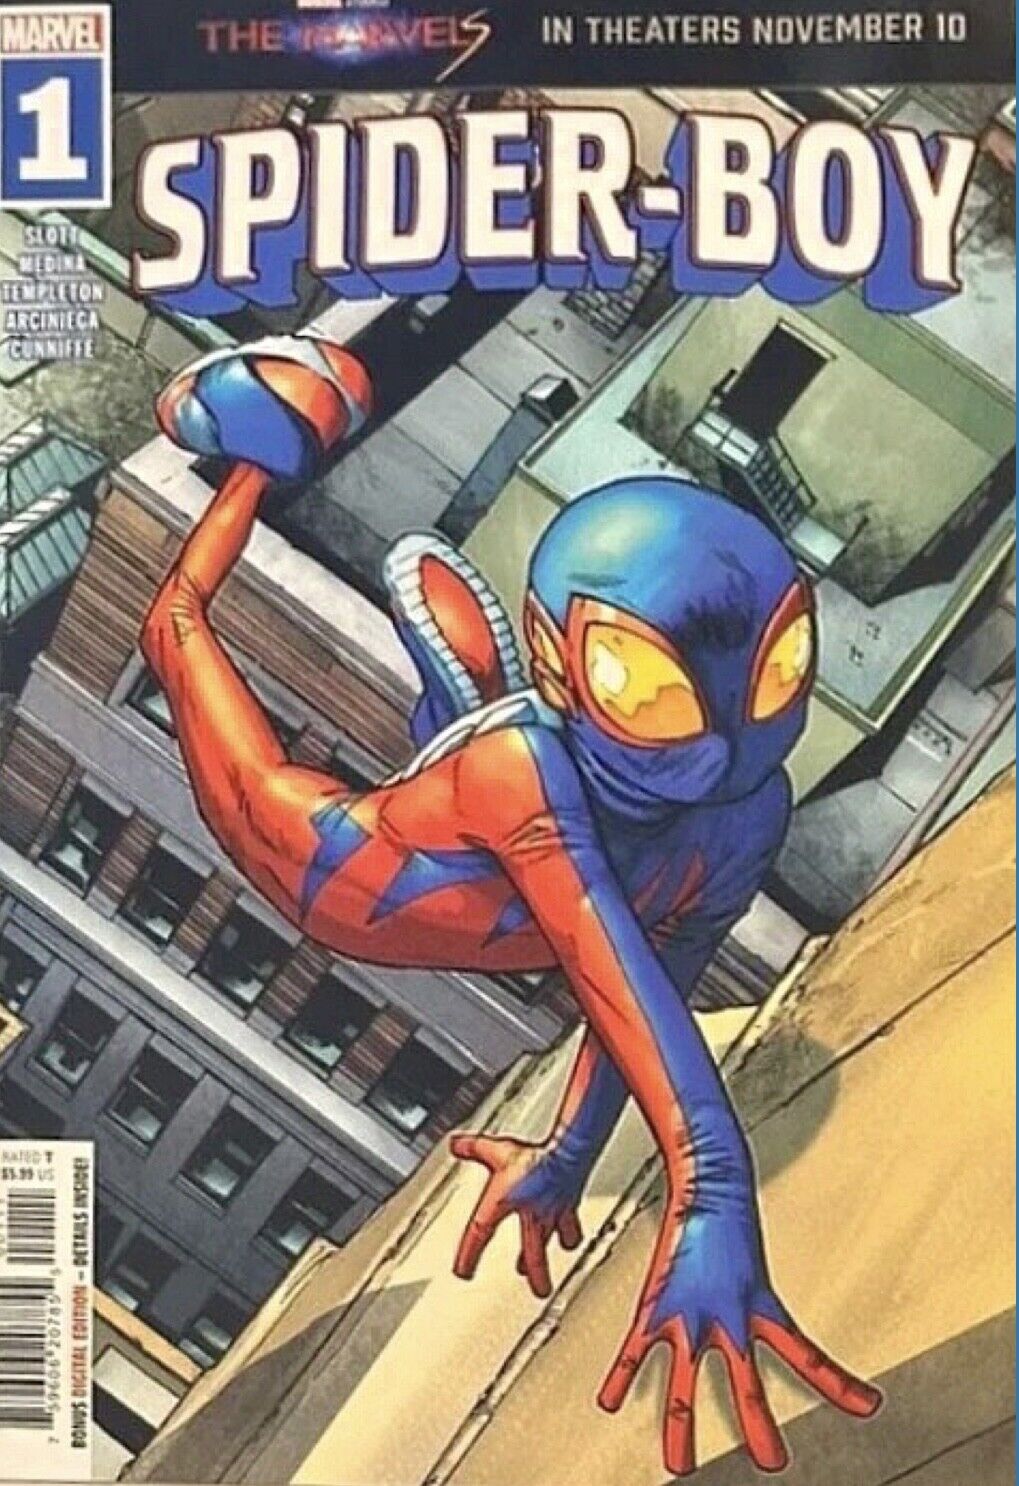 SPIDER-BOY #1 (2023, Marvel) OVERSIZED 1ST ISSUE  COVER SELECT - VARIANTS.  NM